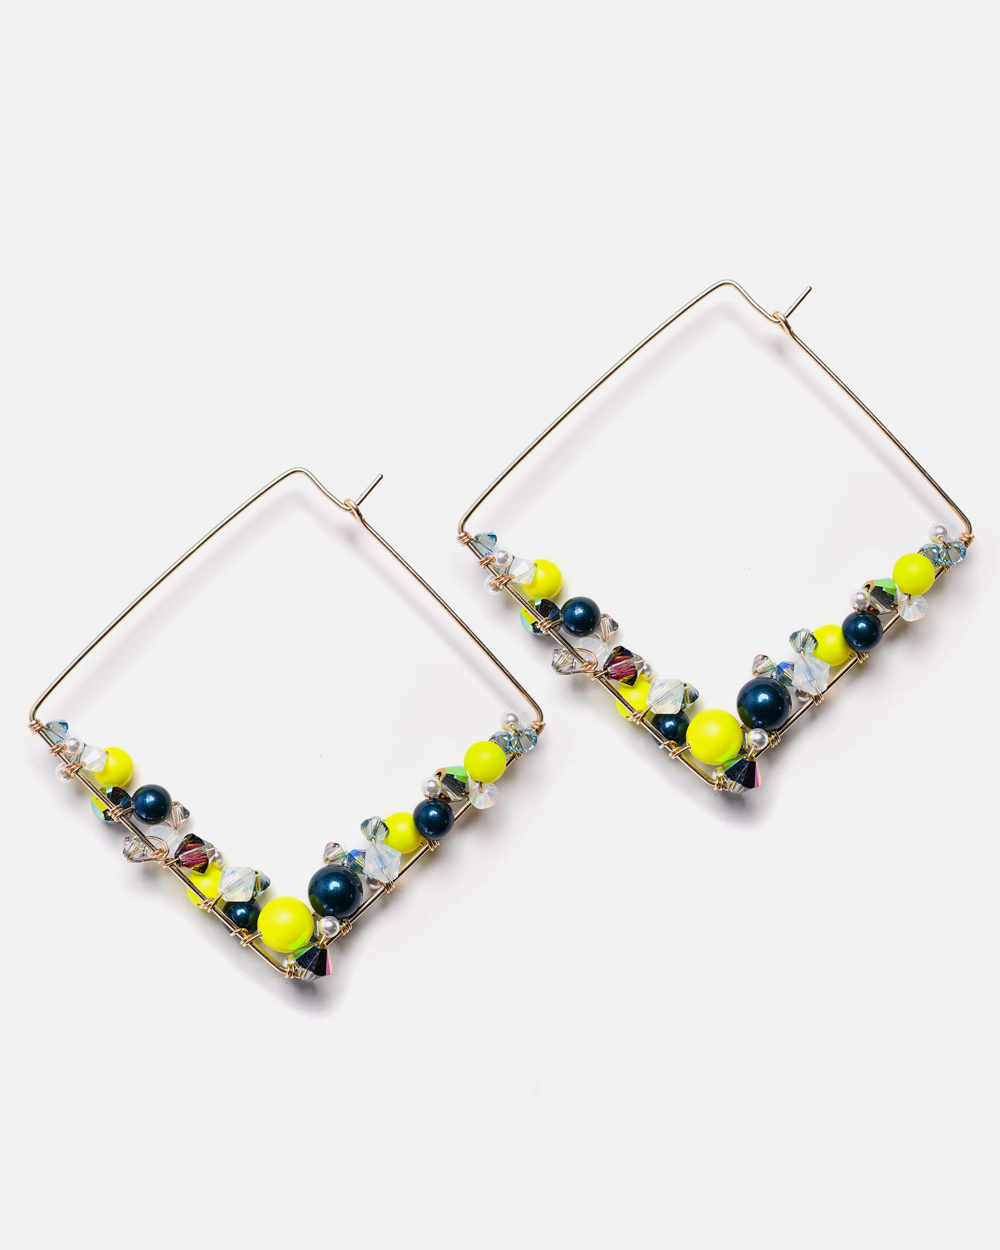 14k gold filled earrings with neon yellow pearls and colorful crystals